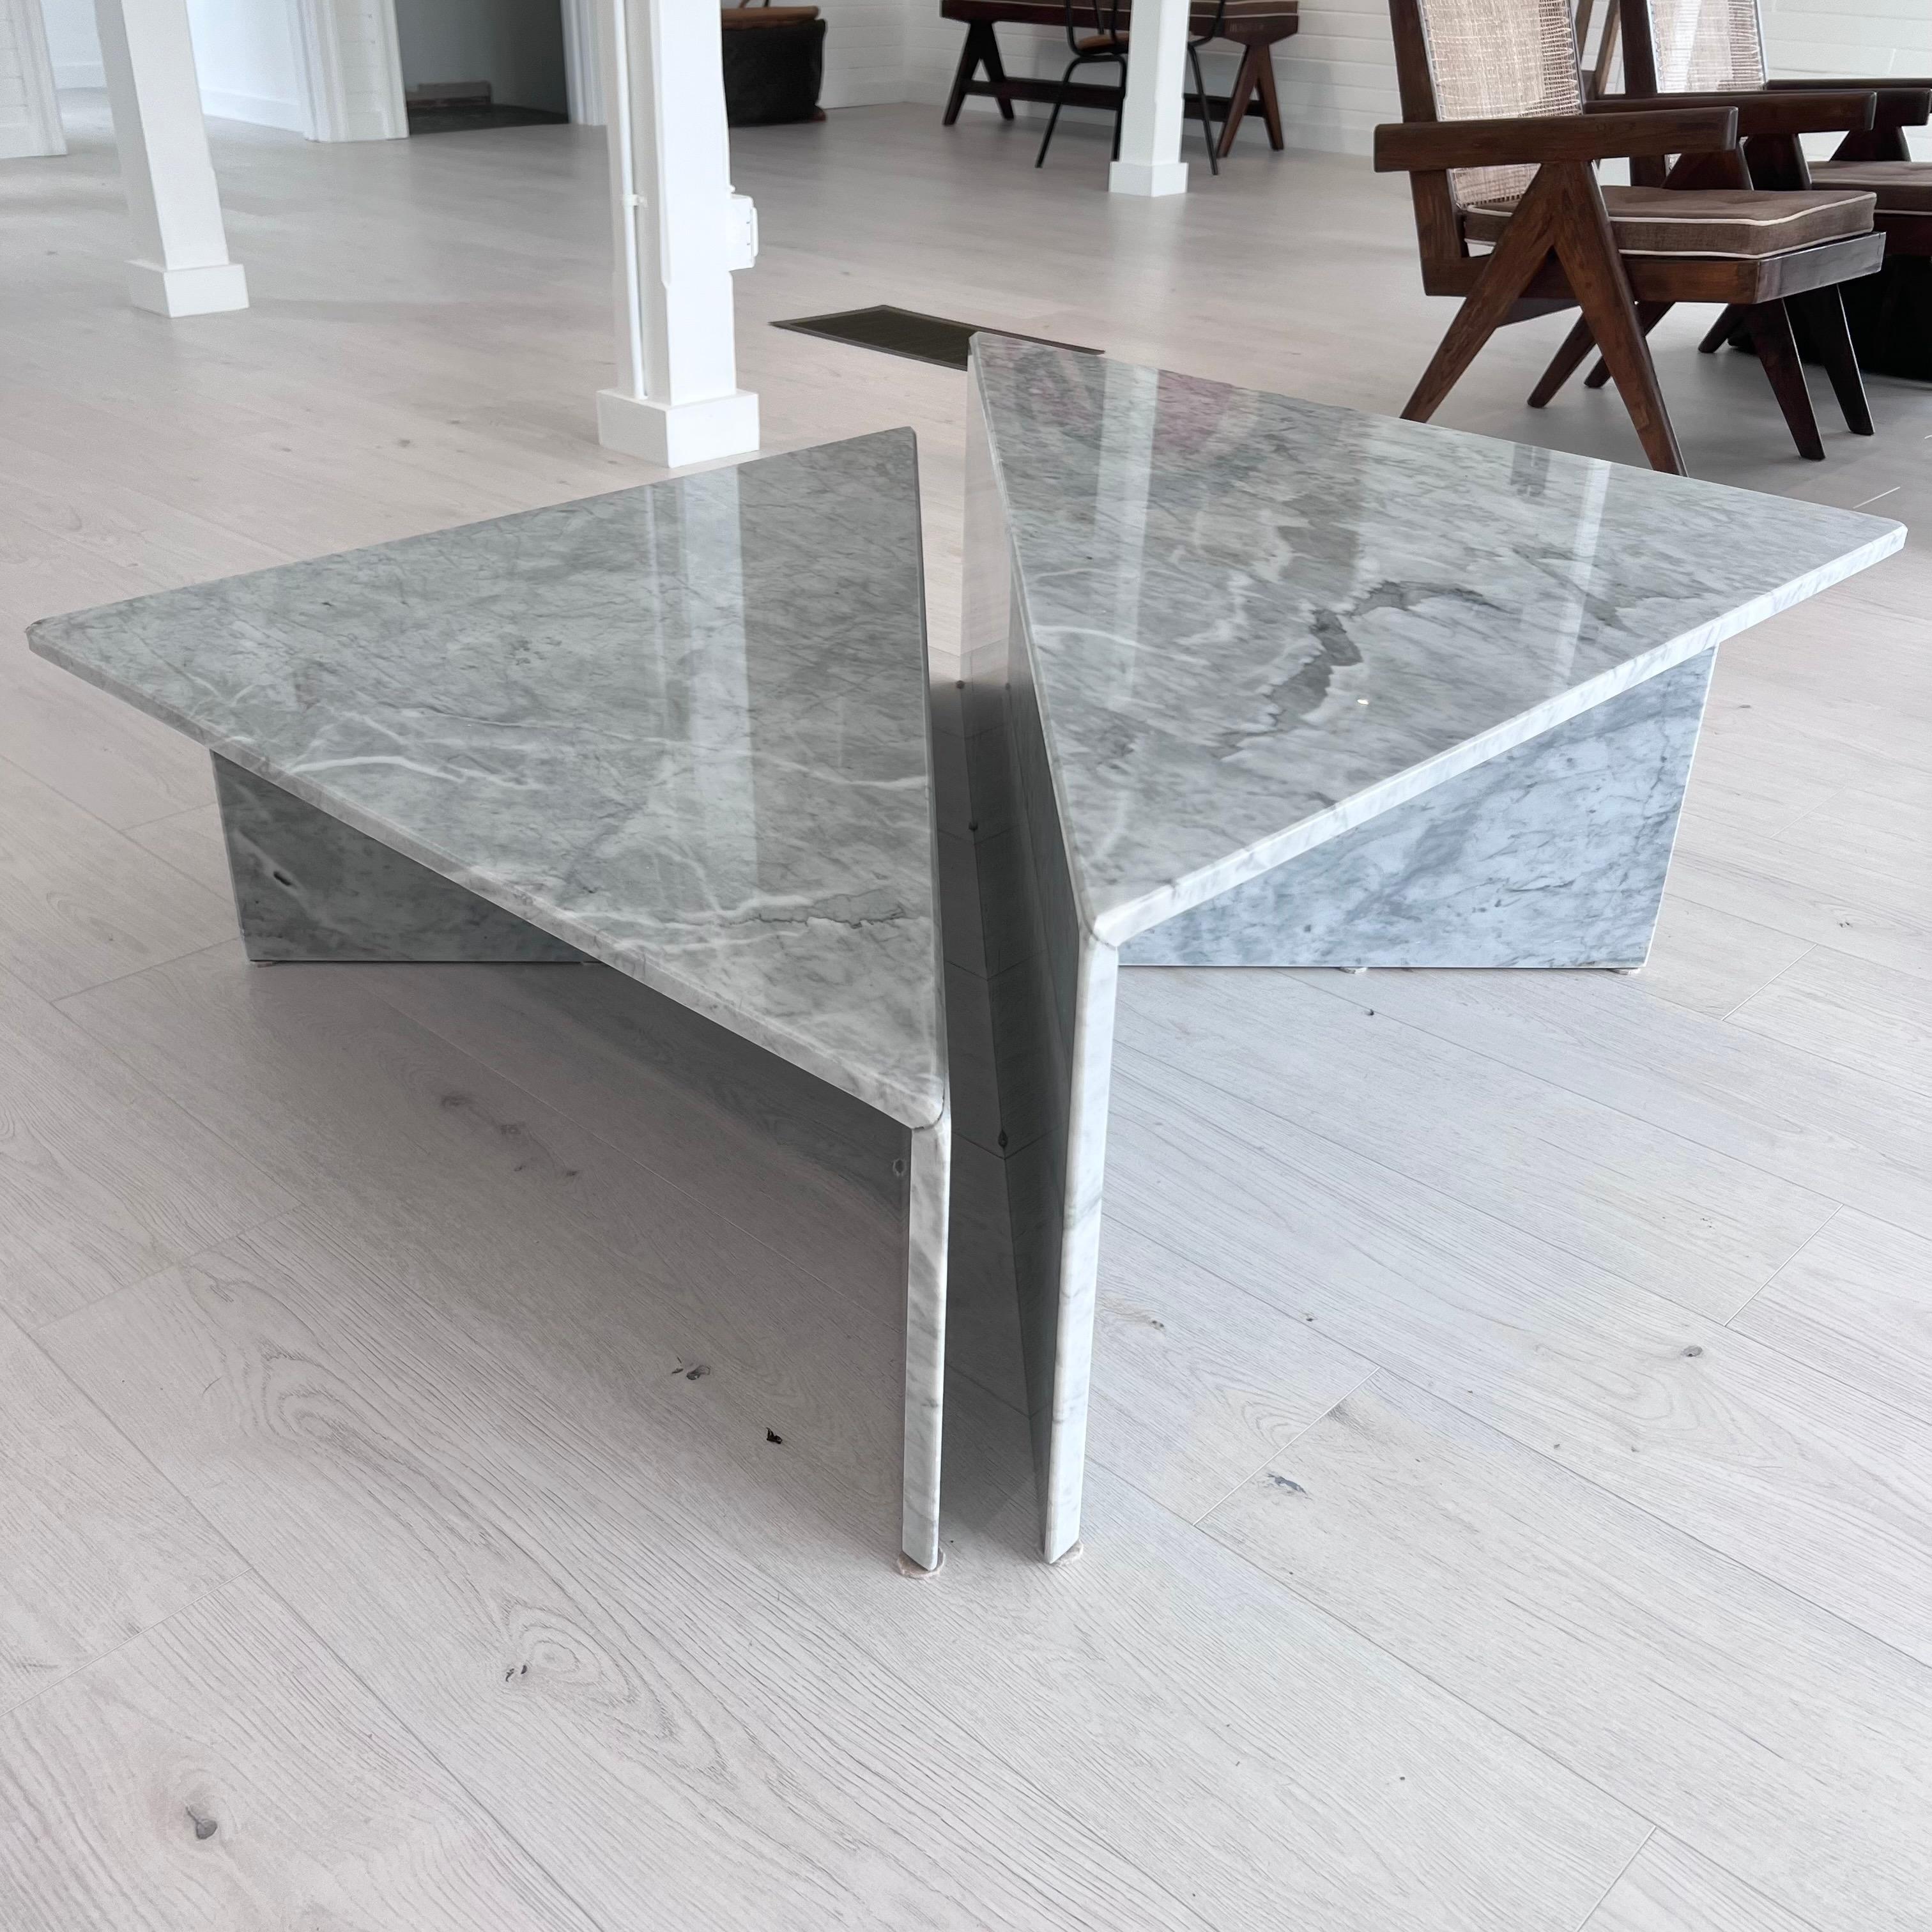 Elegant Carrara split marble cocktail table. Perfect scale. Stunning lines with sharp angles and features make this table quite eye catching. The table consists of 2 independent triangular halves which combine to create a full square coffee table.